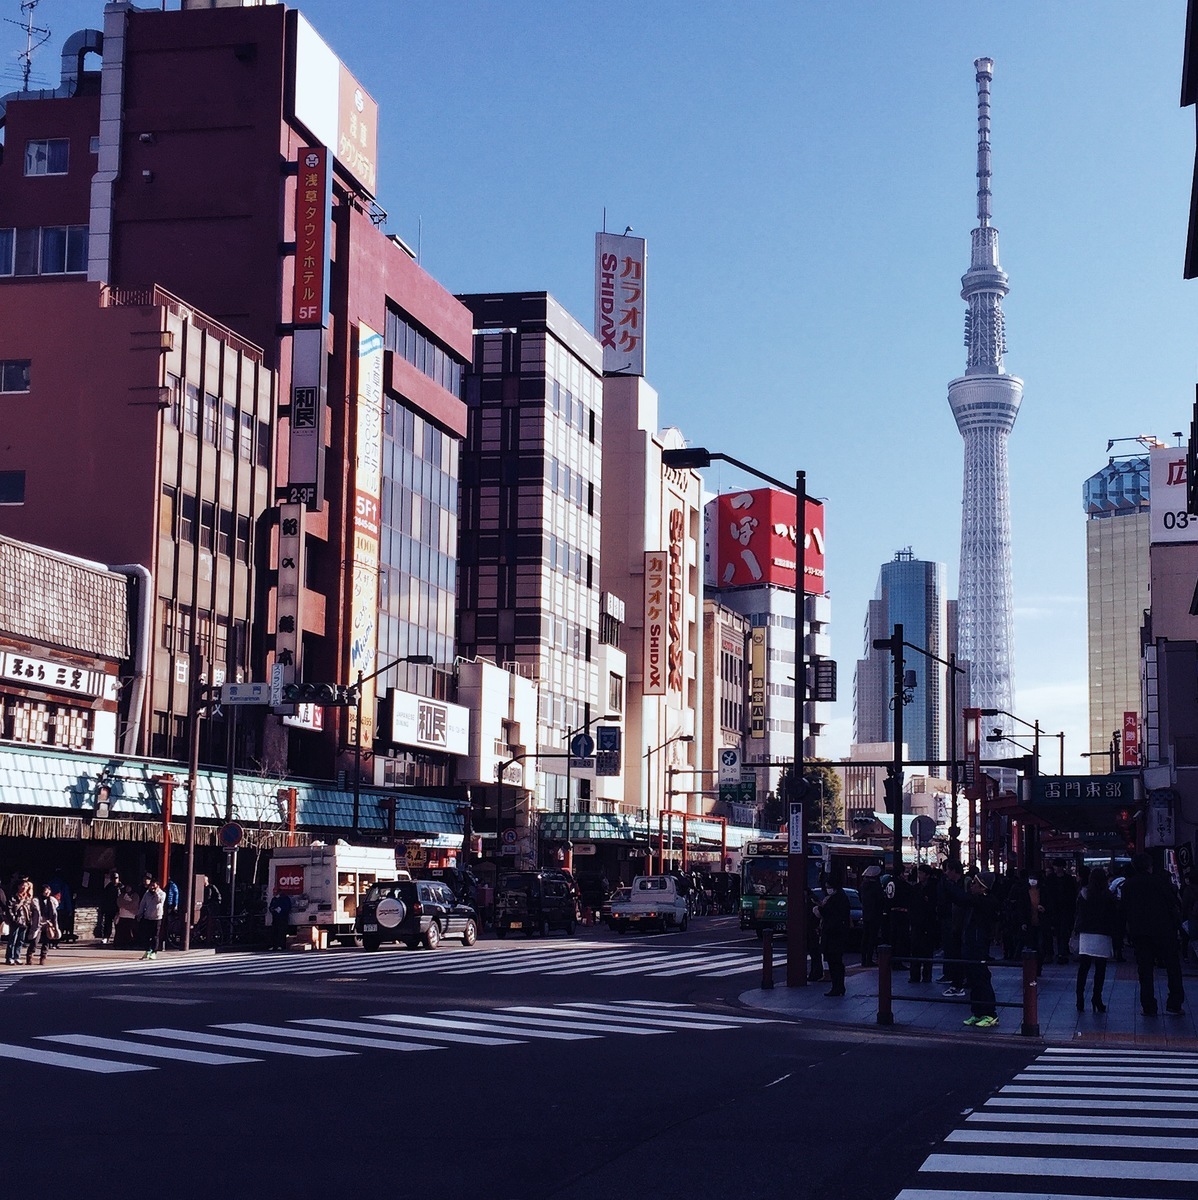 city streets in tokyo with a view of the stunning sky tower